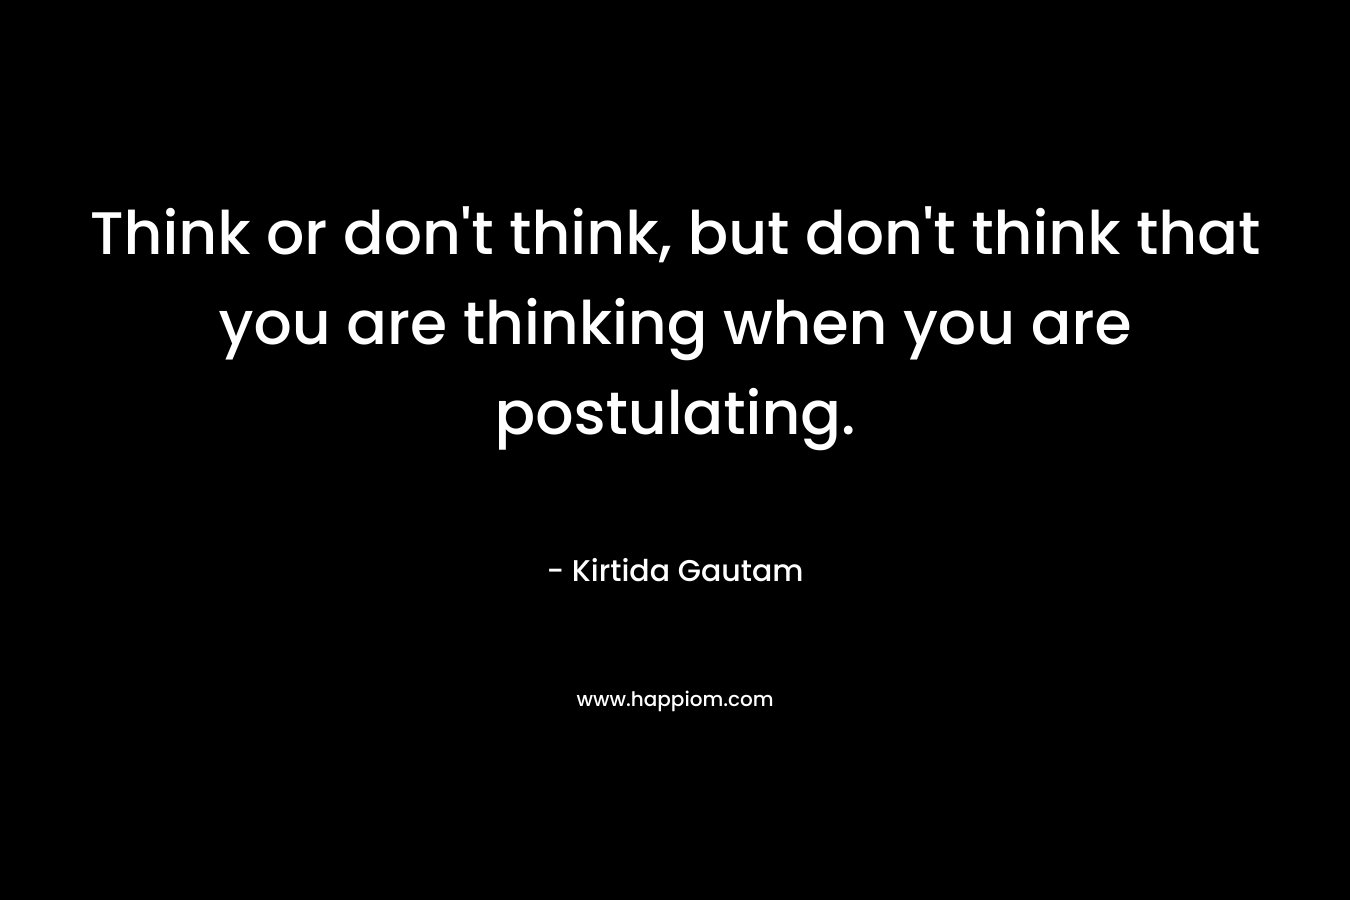 Think or don’t think, but don’t think that you are thinking when you are postulating. – Kirtida Gautam